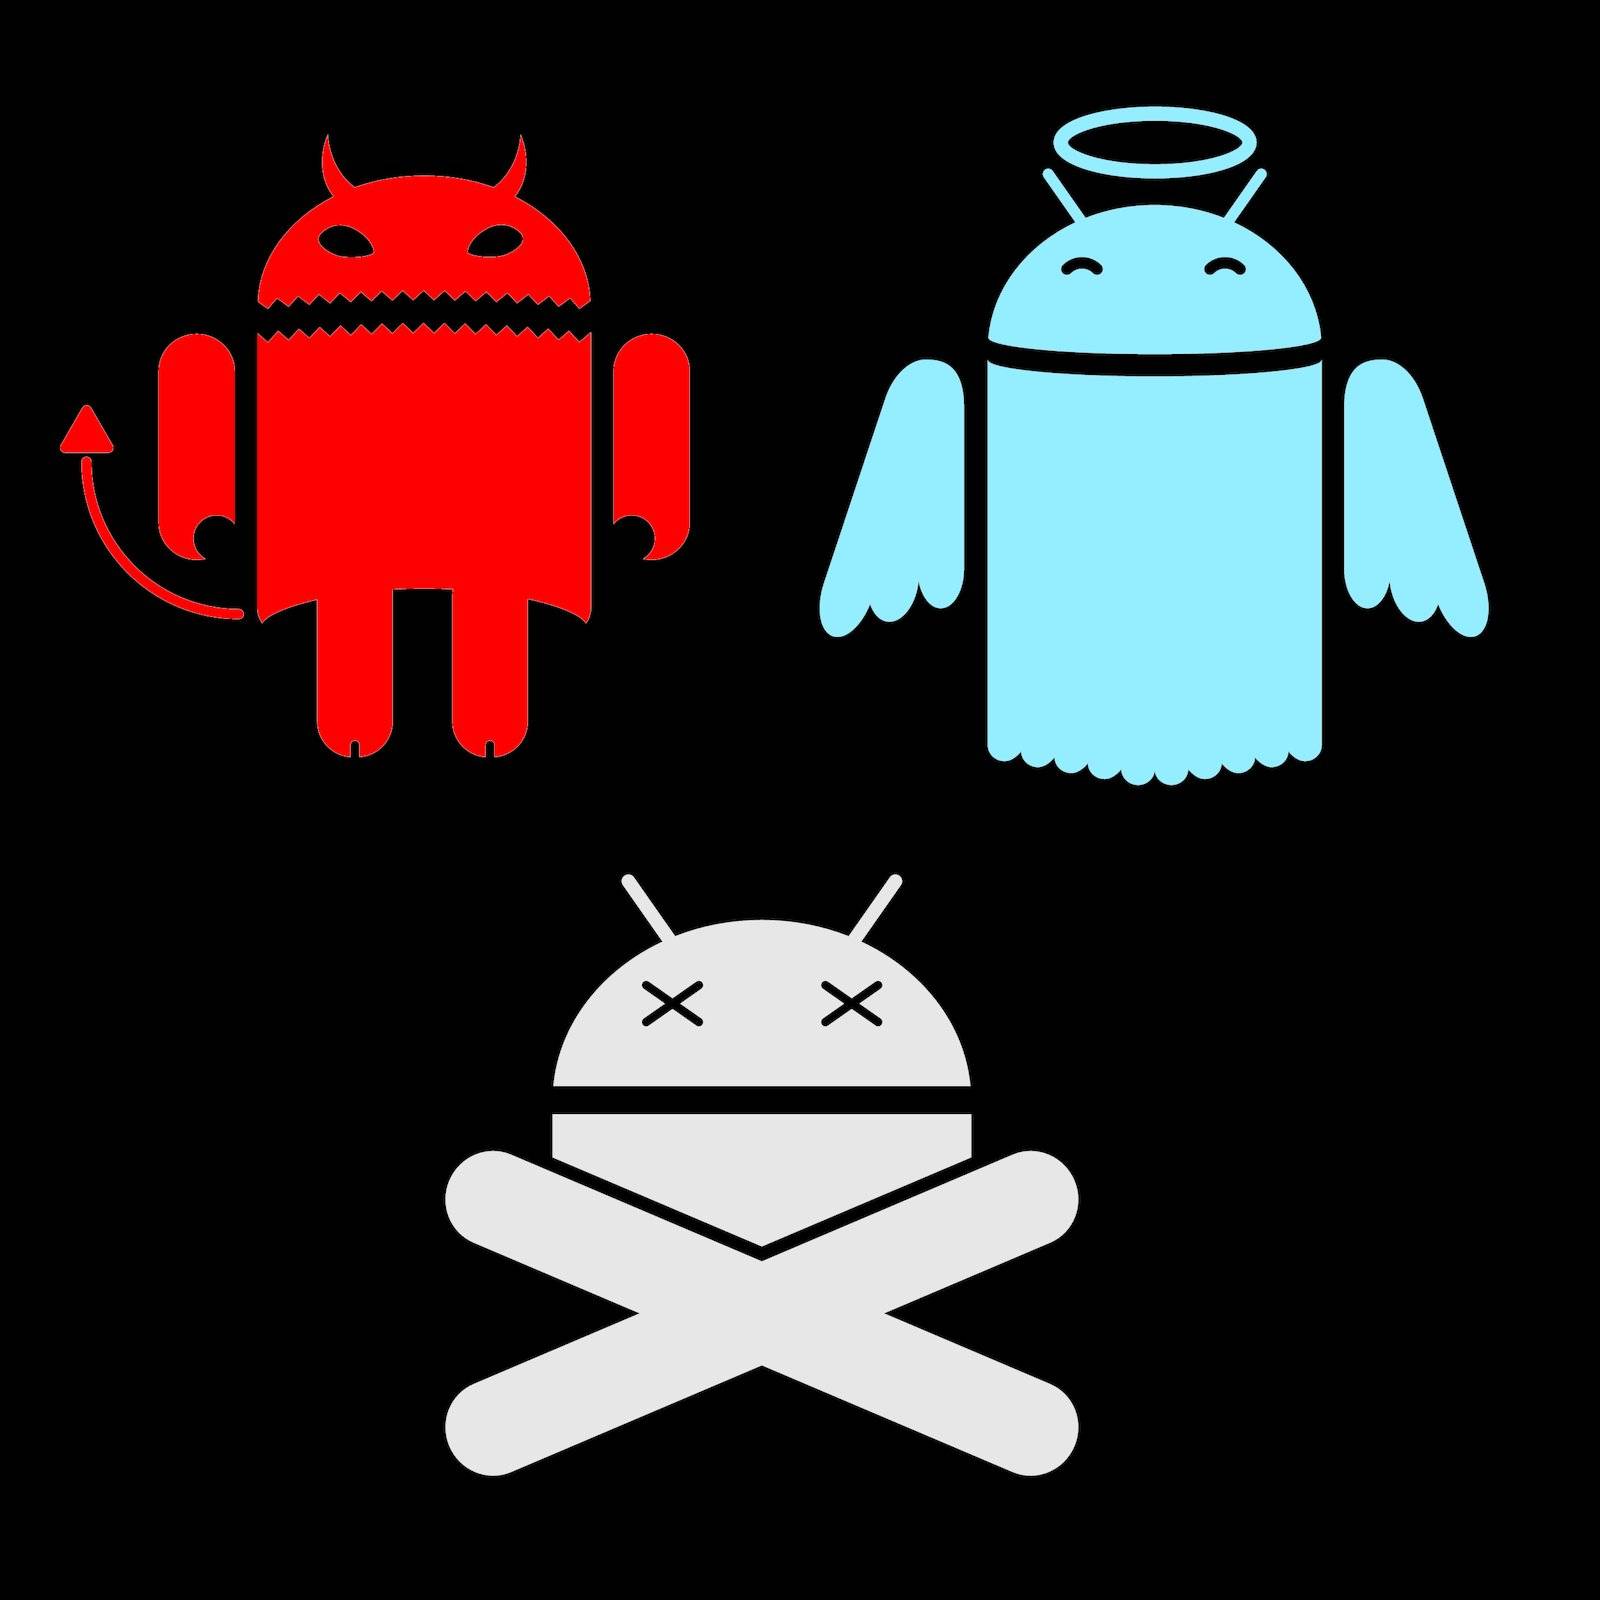 Android Robot Different Versions Of The Appearance by rocketonik